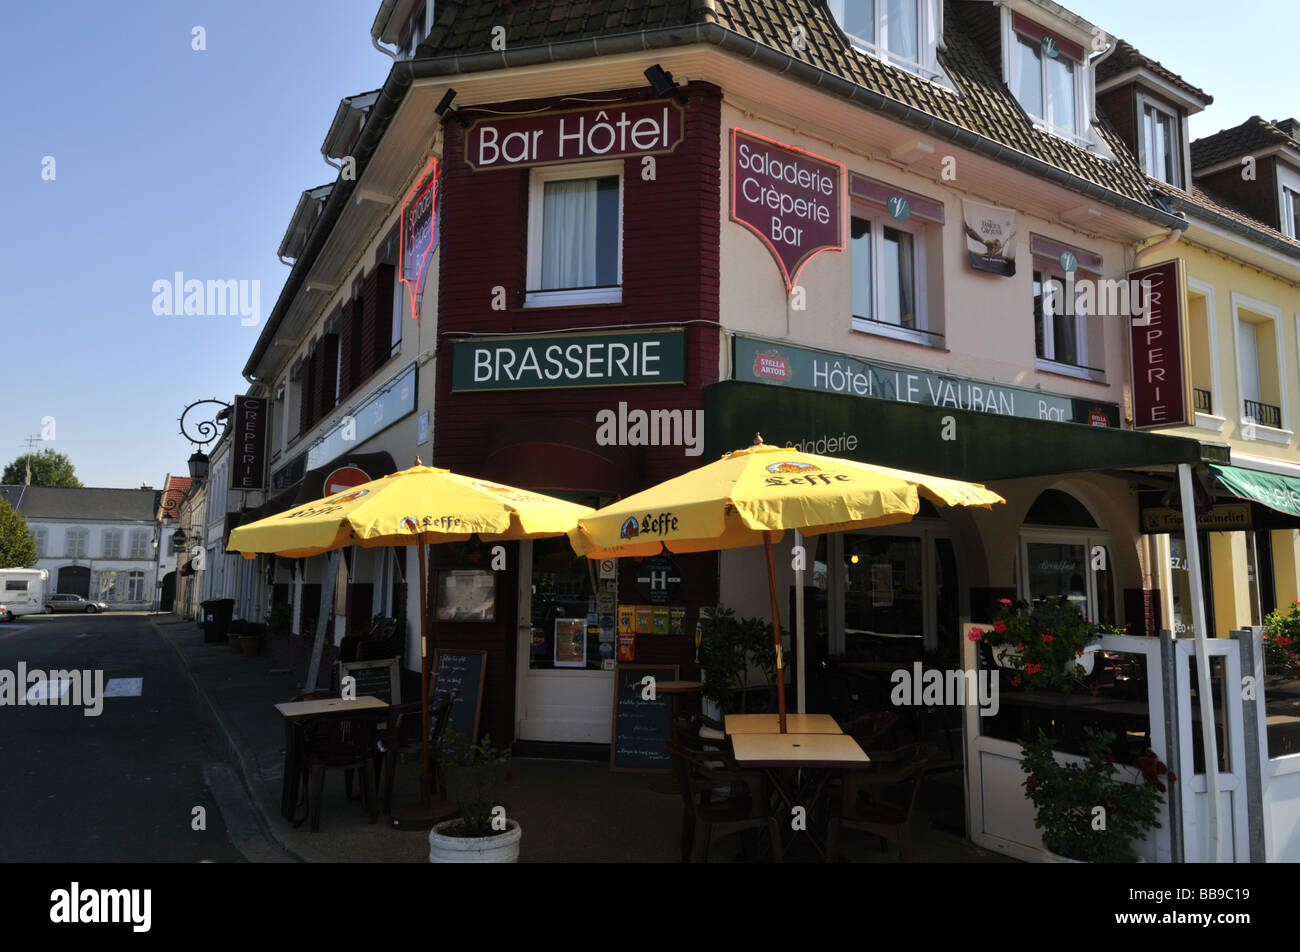 French bar hotel and brasserie Stock Photo